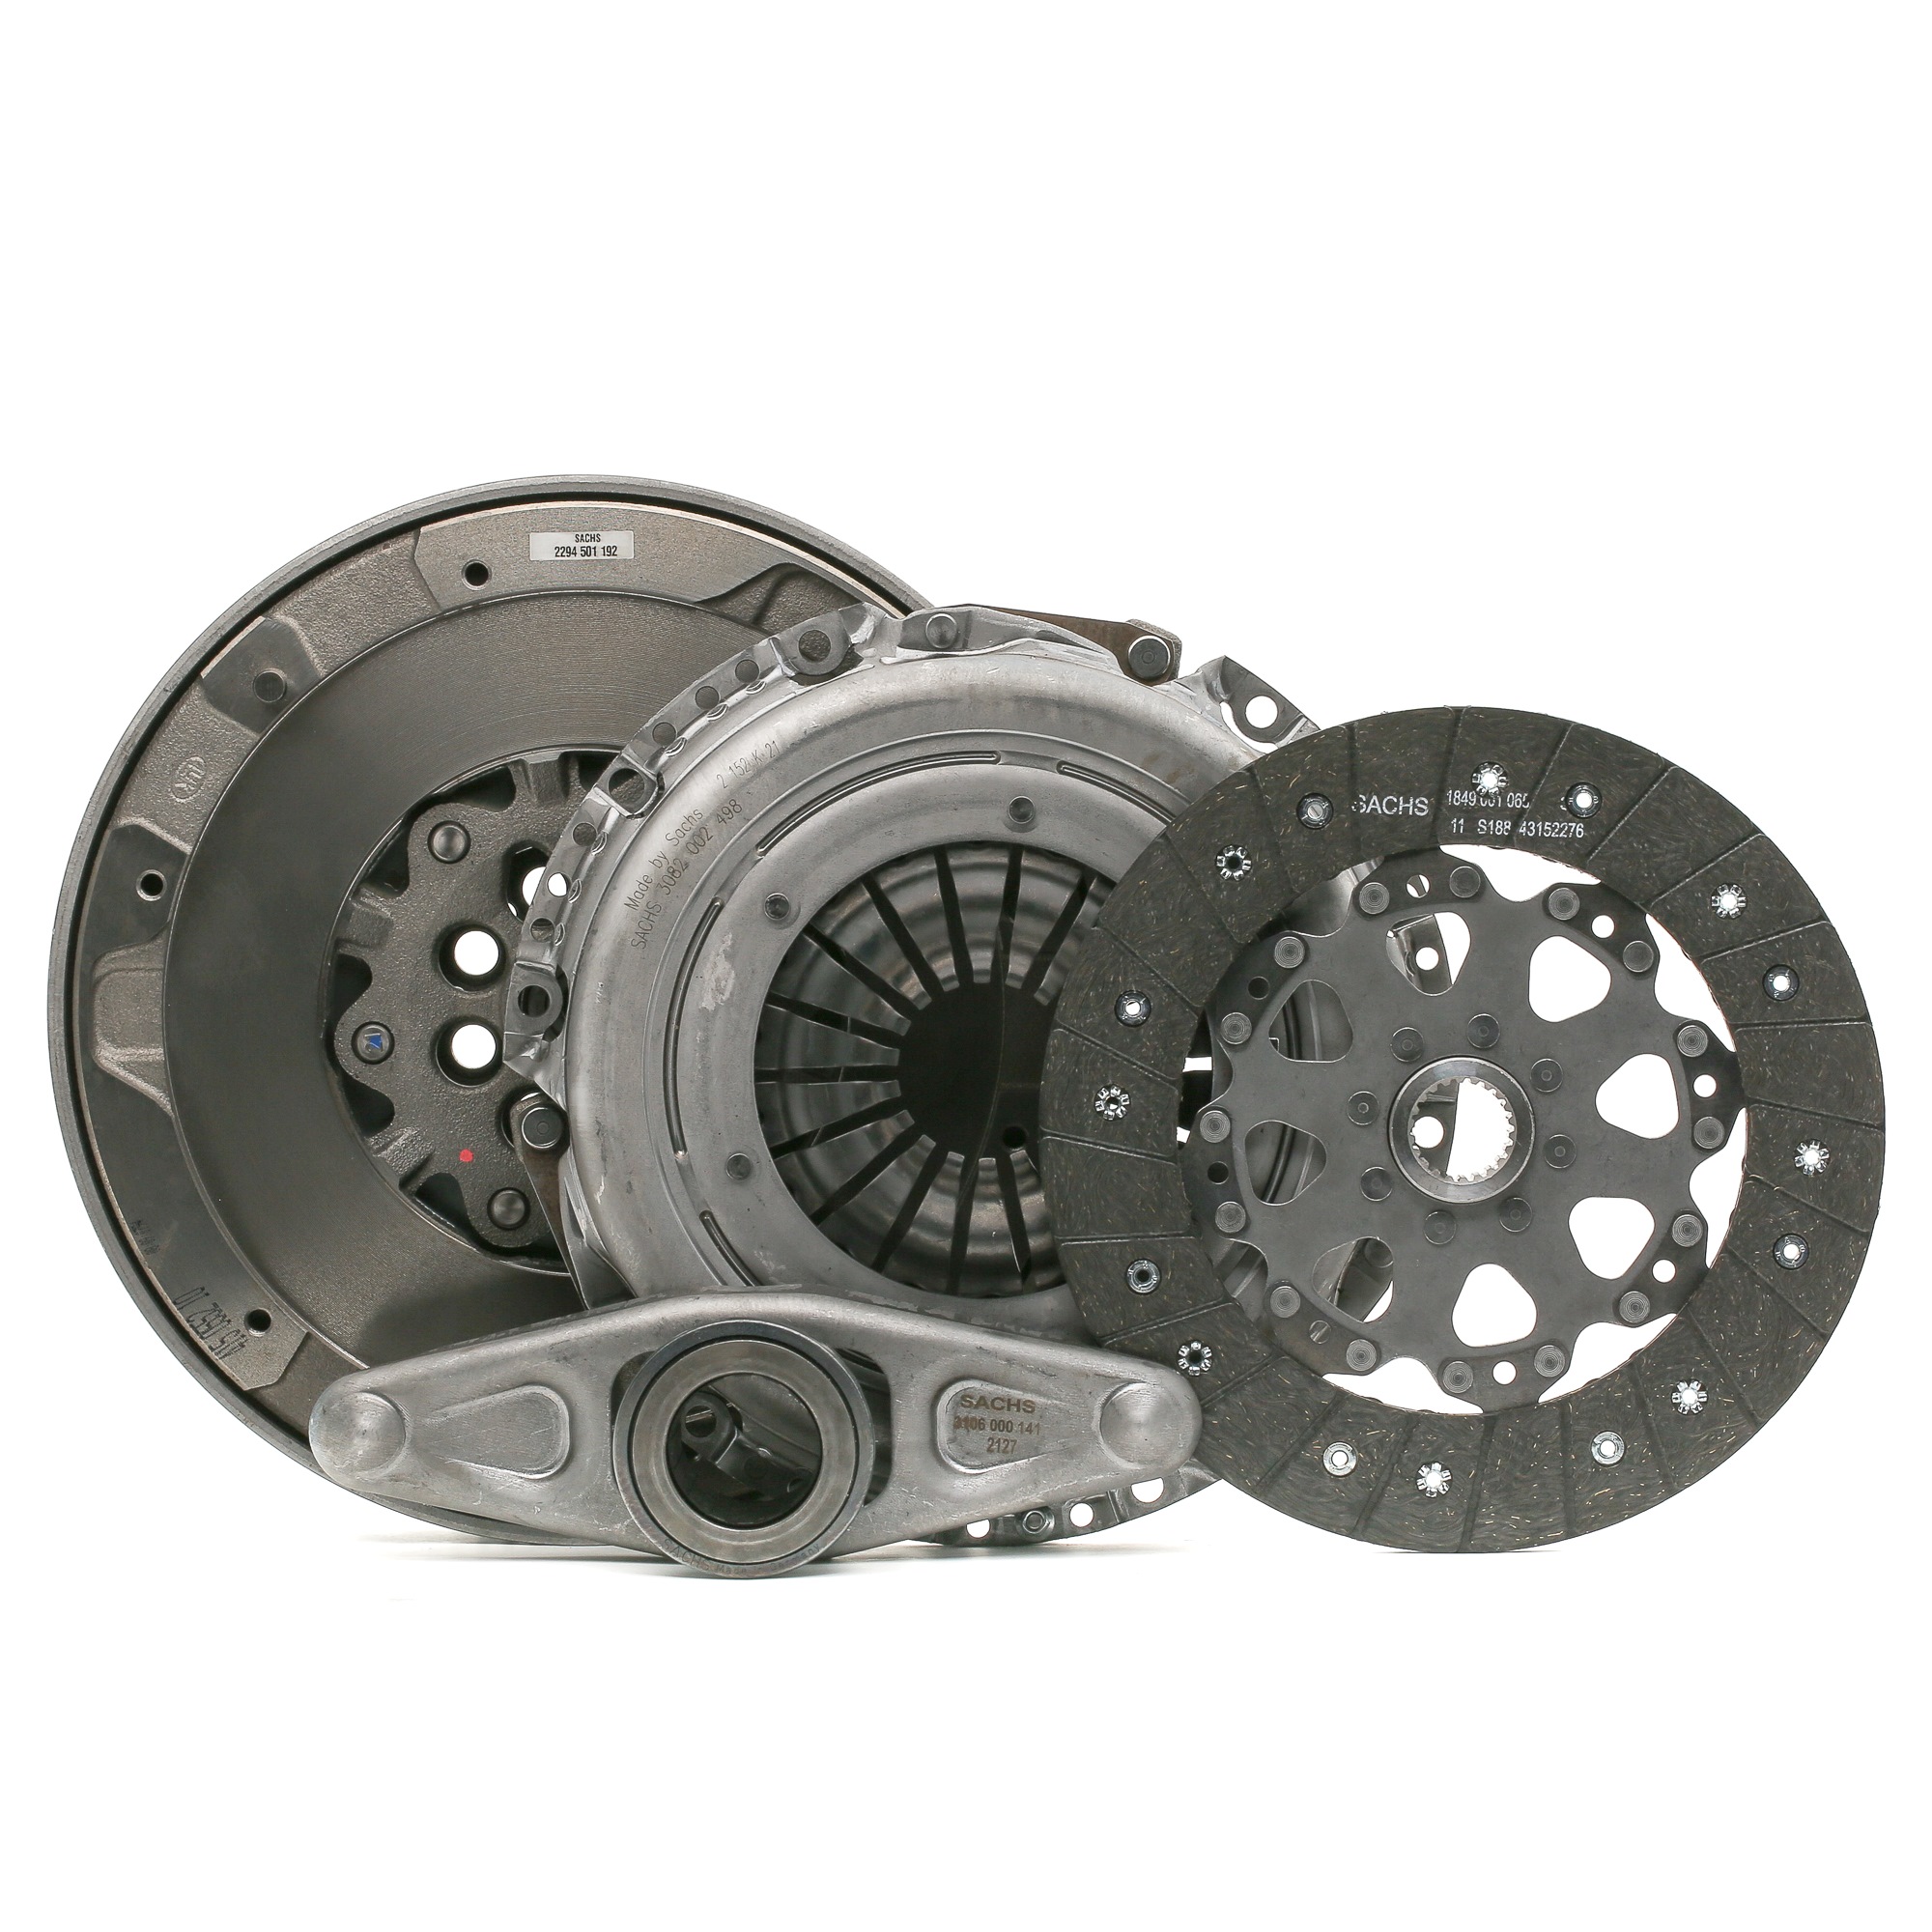 SACHS 2290 601 130 Clutch kit with clutch pressure plate, with flywheel screws, with flywheel, with clutch disc, with clutch release bearing, 240mm